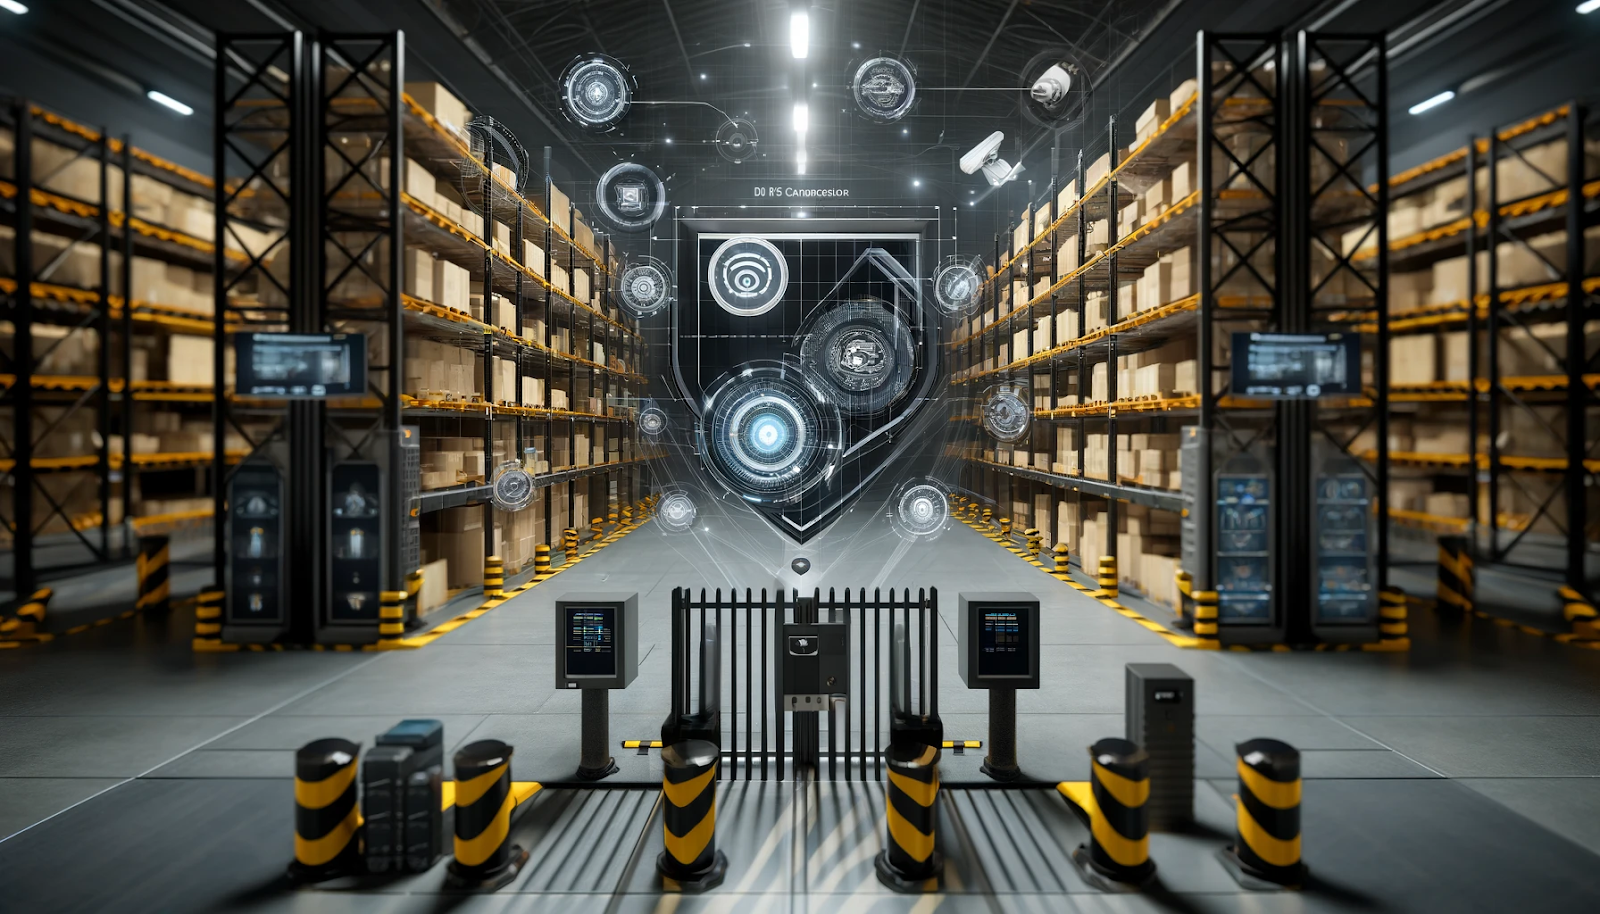 Photorealistic image of a secure warehouse with high-tech surveillance cameras, RFID tags, and electronic article surveillance (EAS) systems. The image prominently features black and gold colors, symbolizing protection and value.